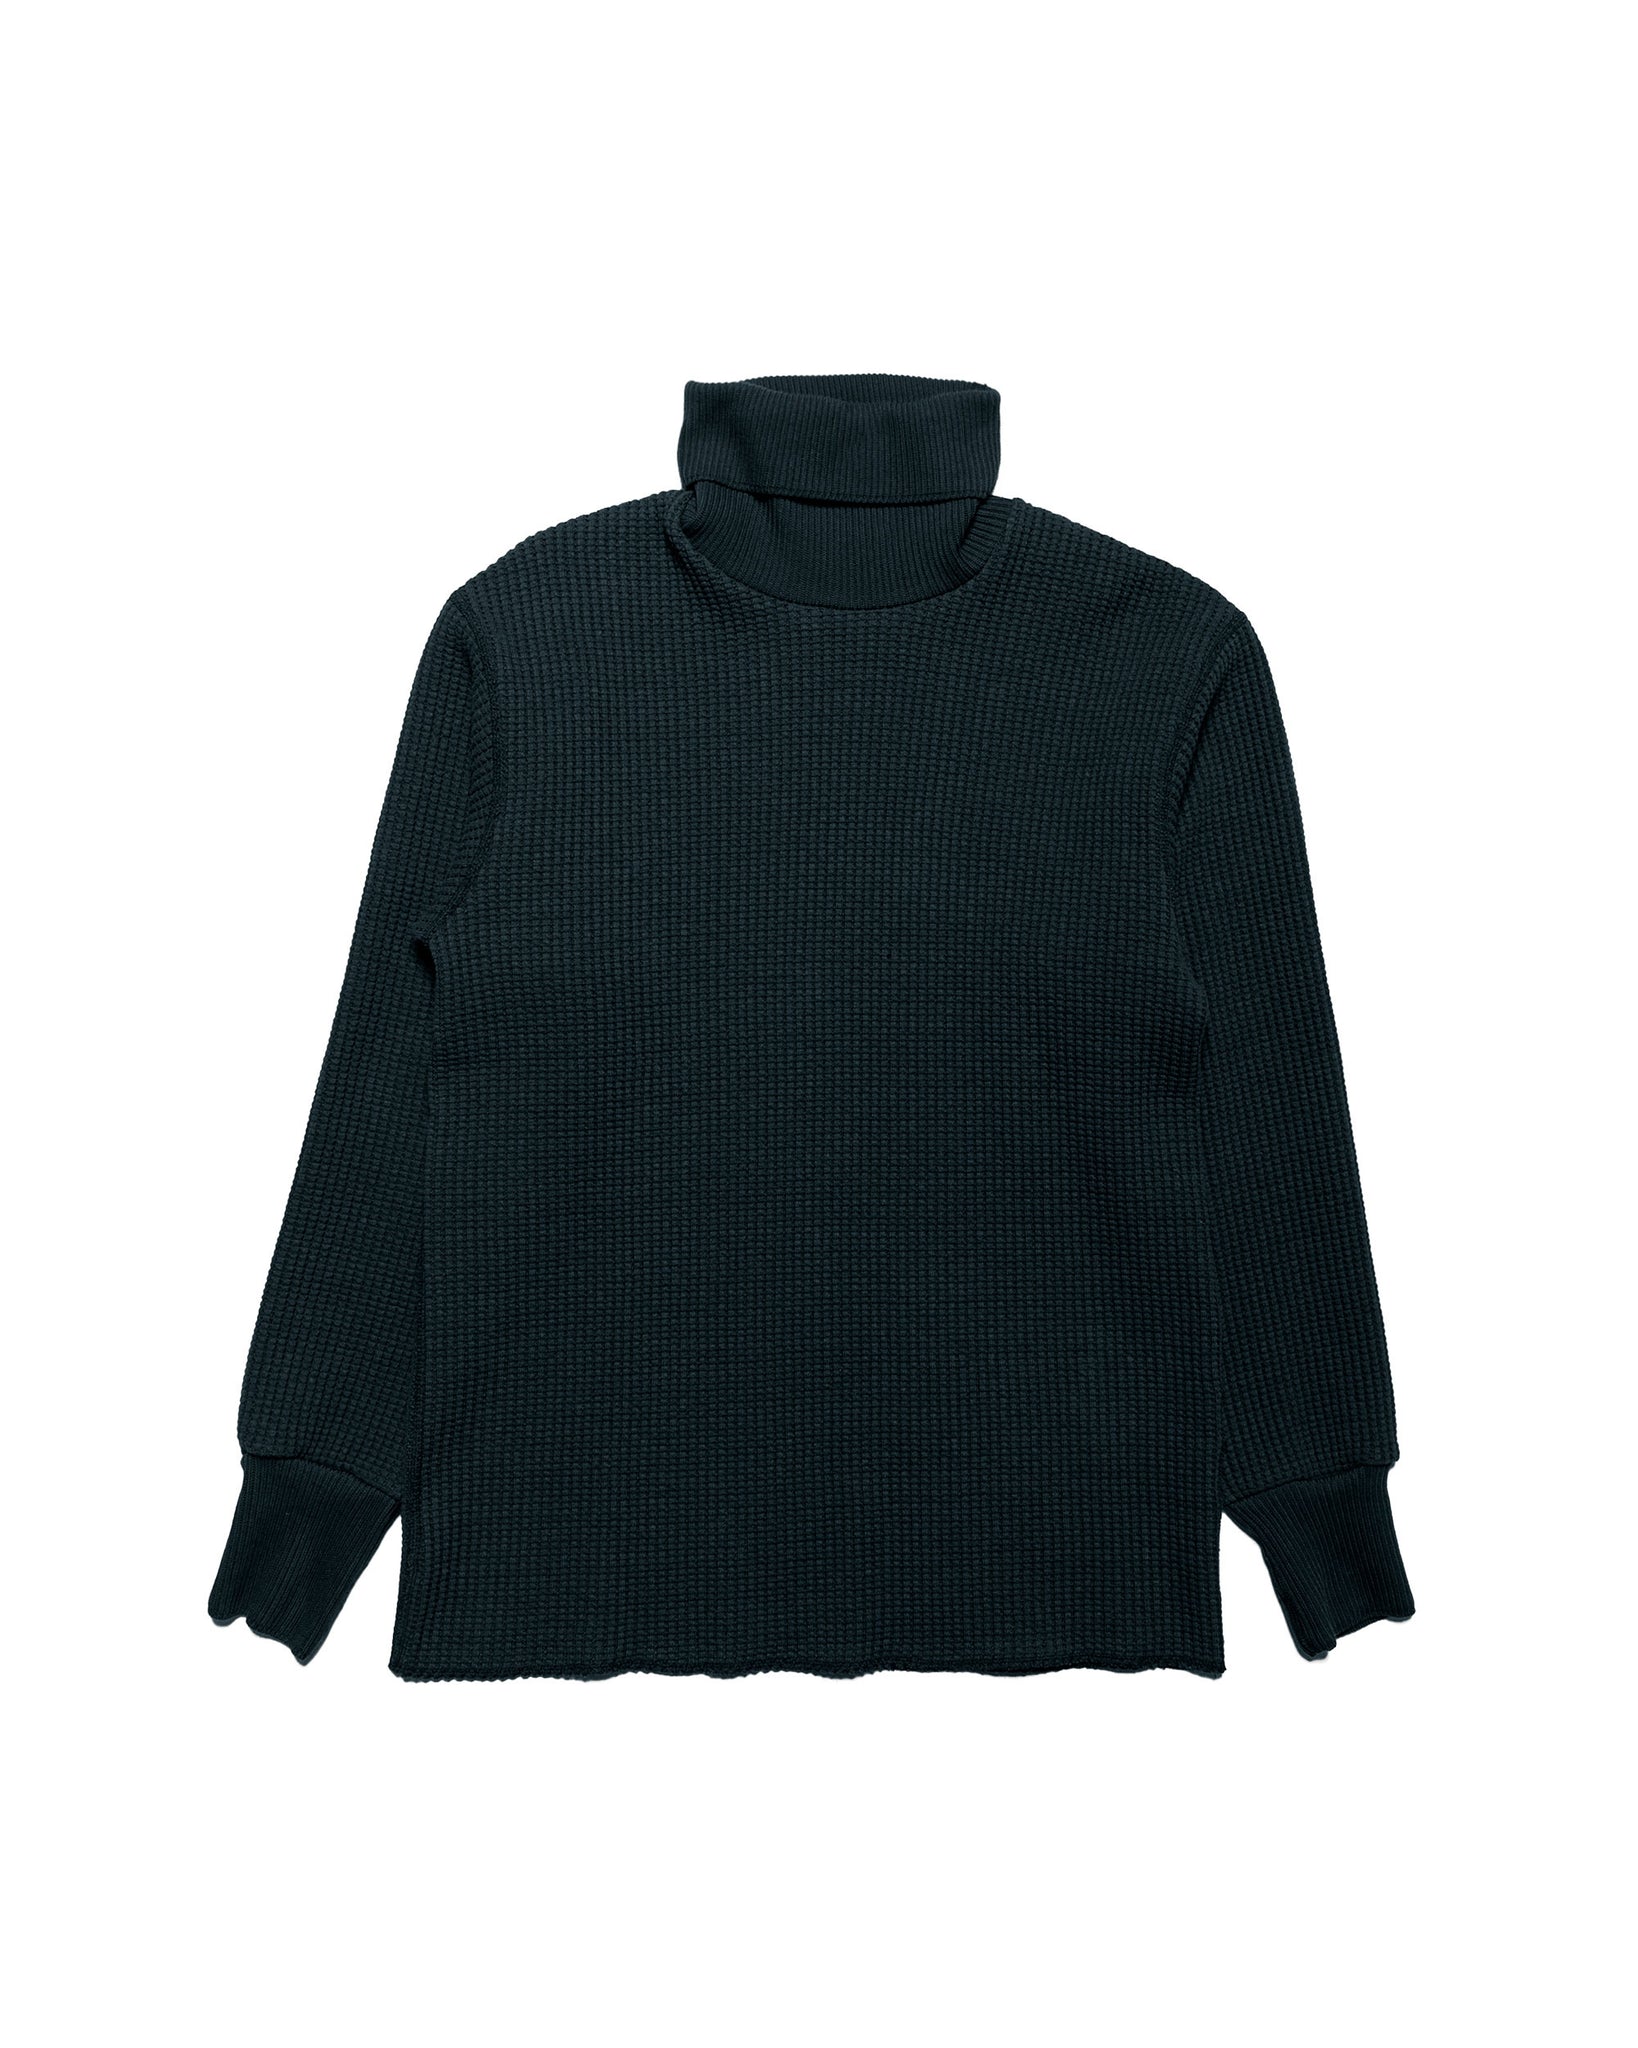 The Real McCoy's MC23110 High Neck Thermal Shirt Navy